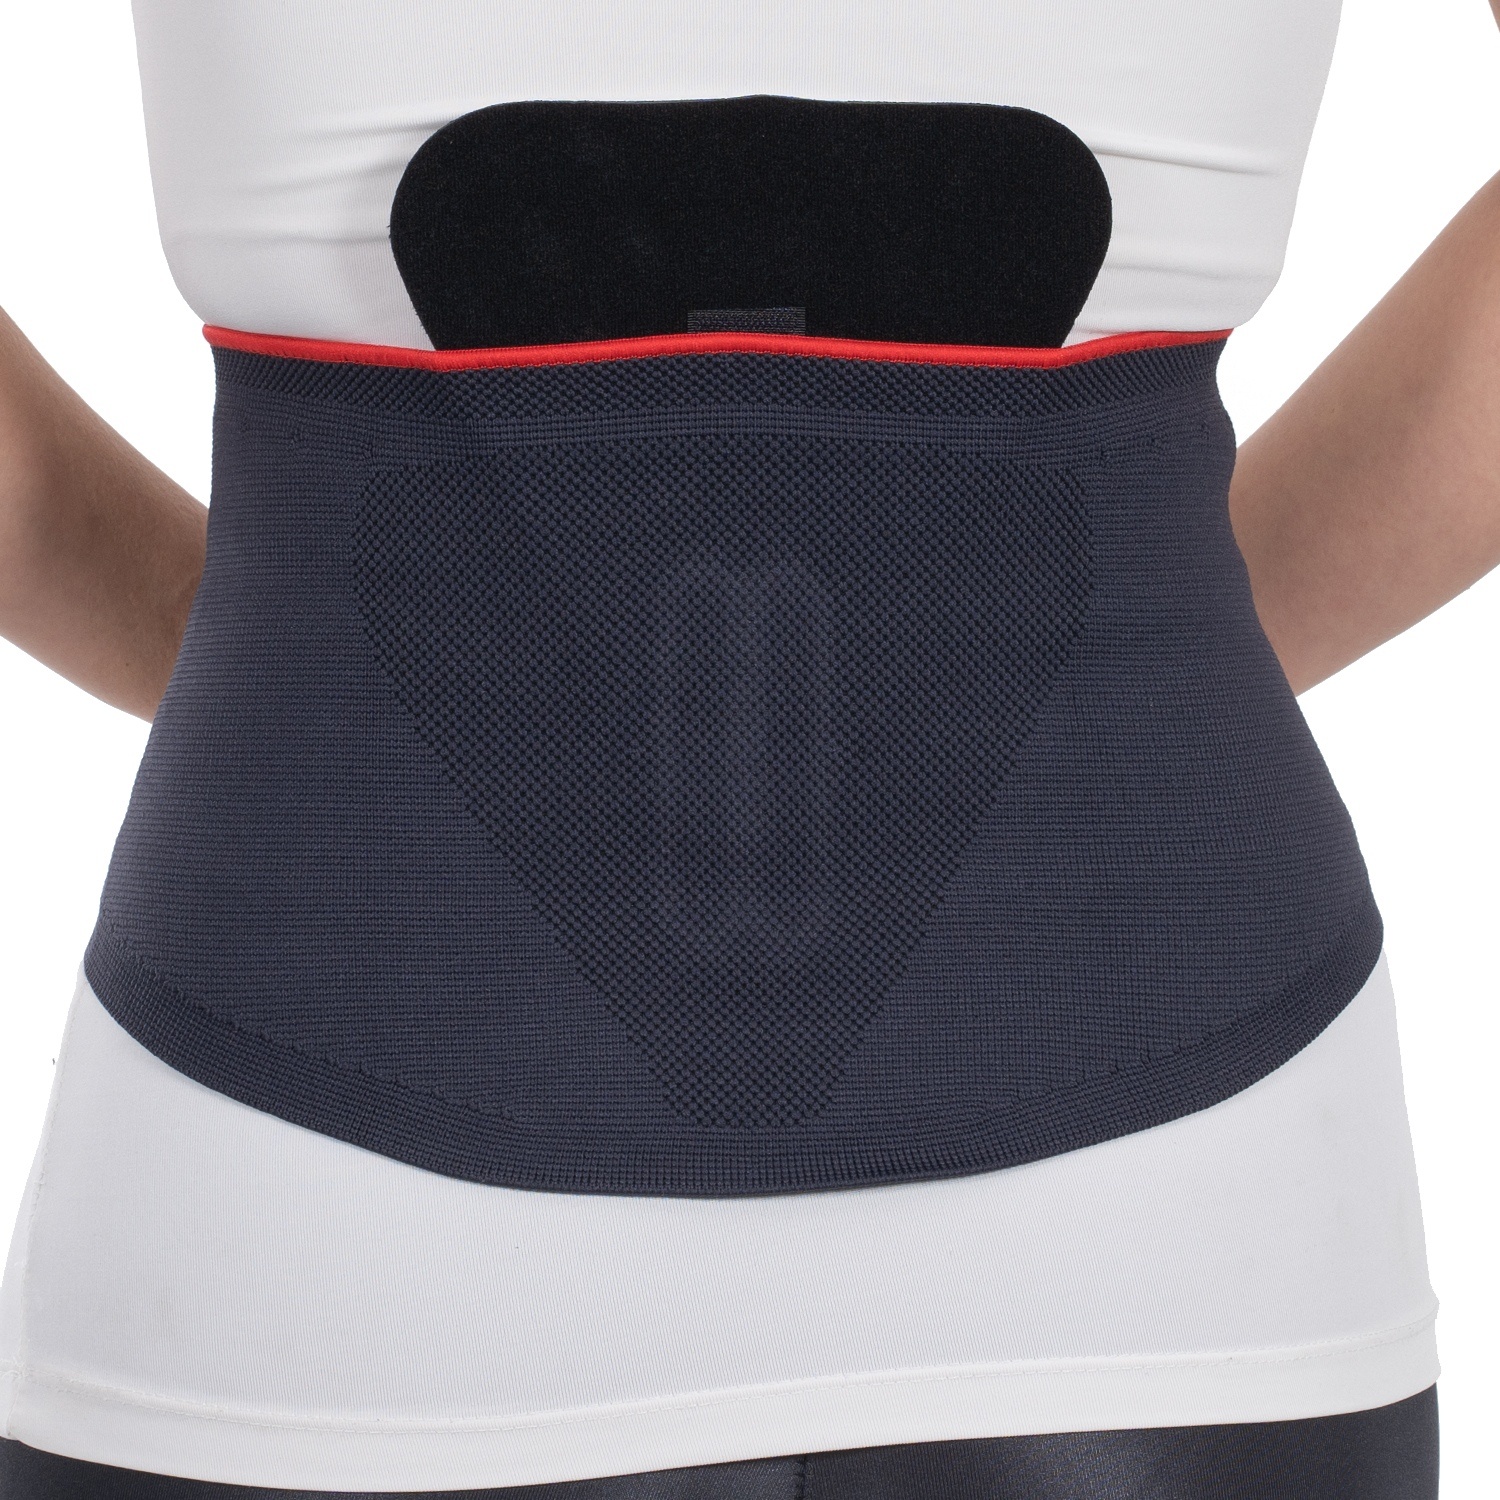 https://www.wingmed.com.tr/wp-content/uploads/2020/03/wingmed-orthopedic-equipments-W437-woven-corset-with-pad-support-79.jpg